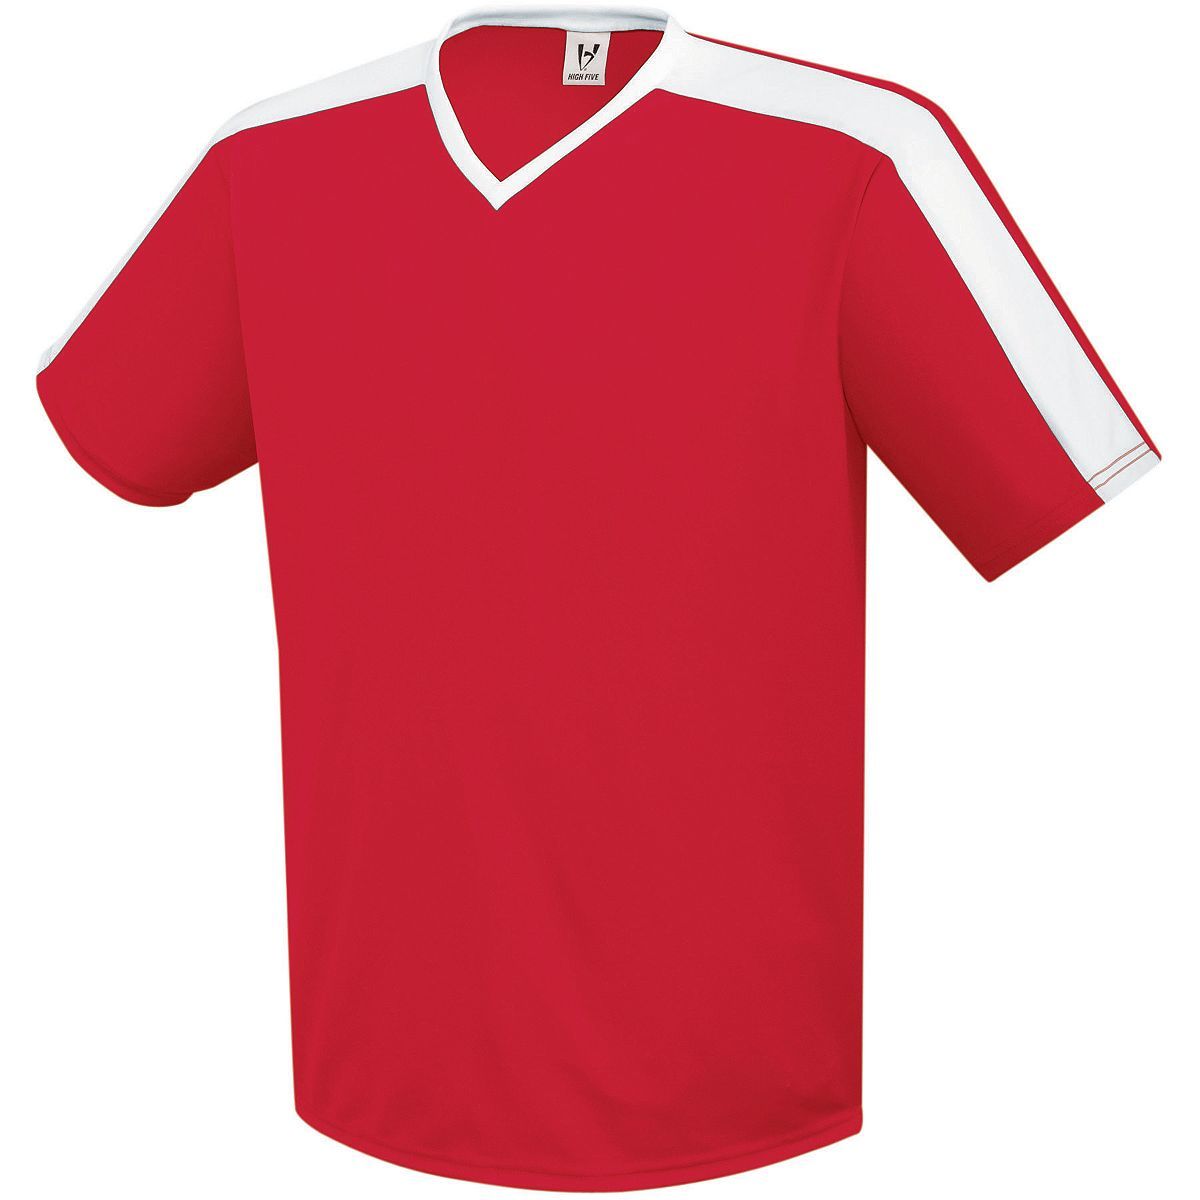 High 5 Genesis Soccer Jersey in Scarlet/White  -Part of the Adult, Adult-Jersey, High5-Products, Soccer, Shirts, All-Sports-1 product lines at KanaleyCreations.com